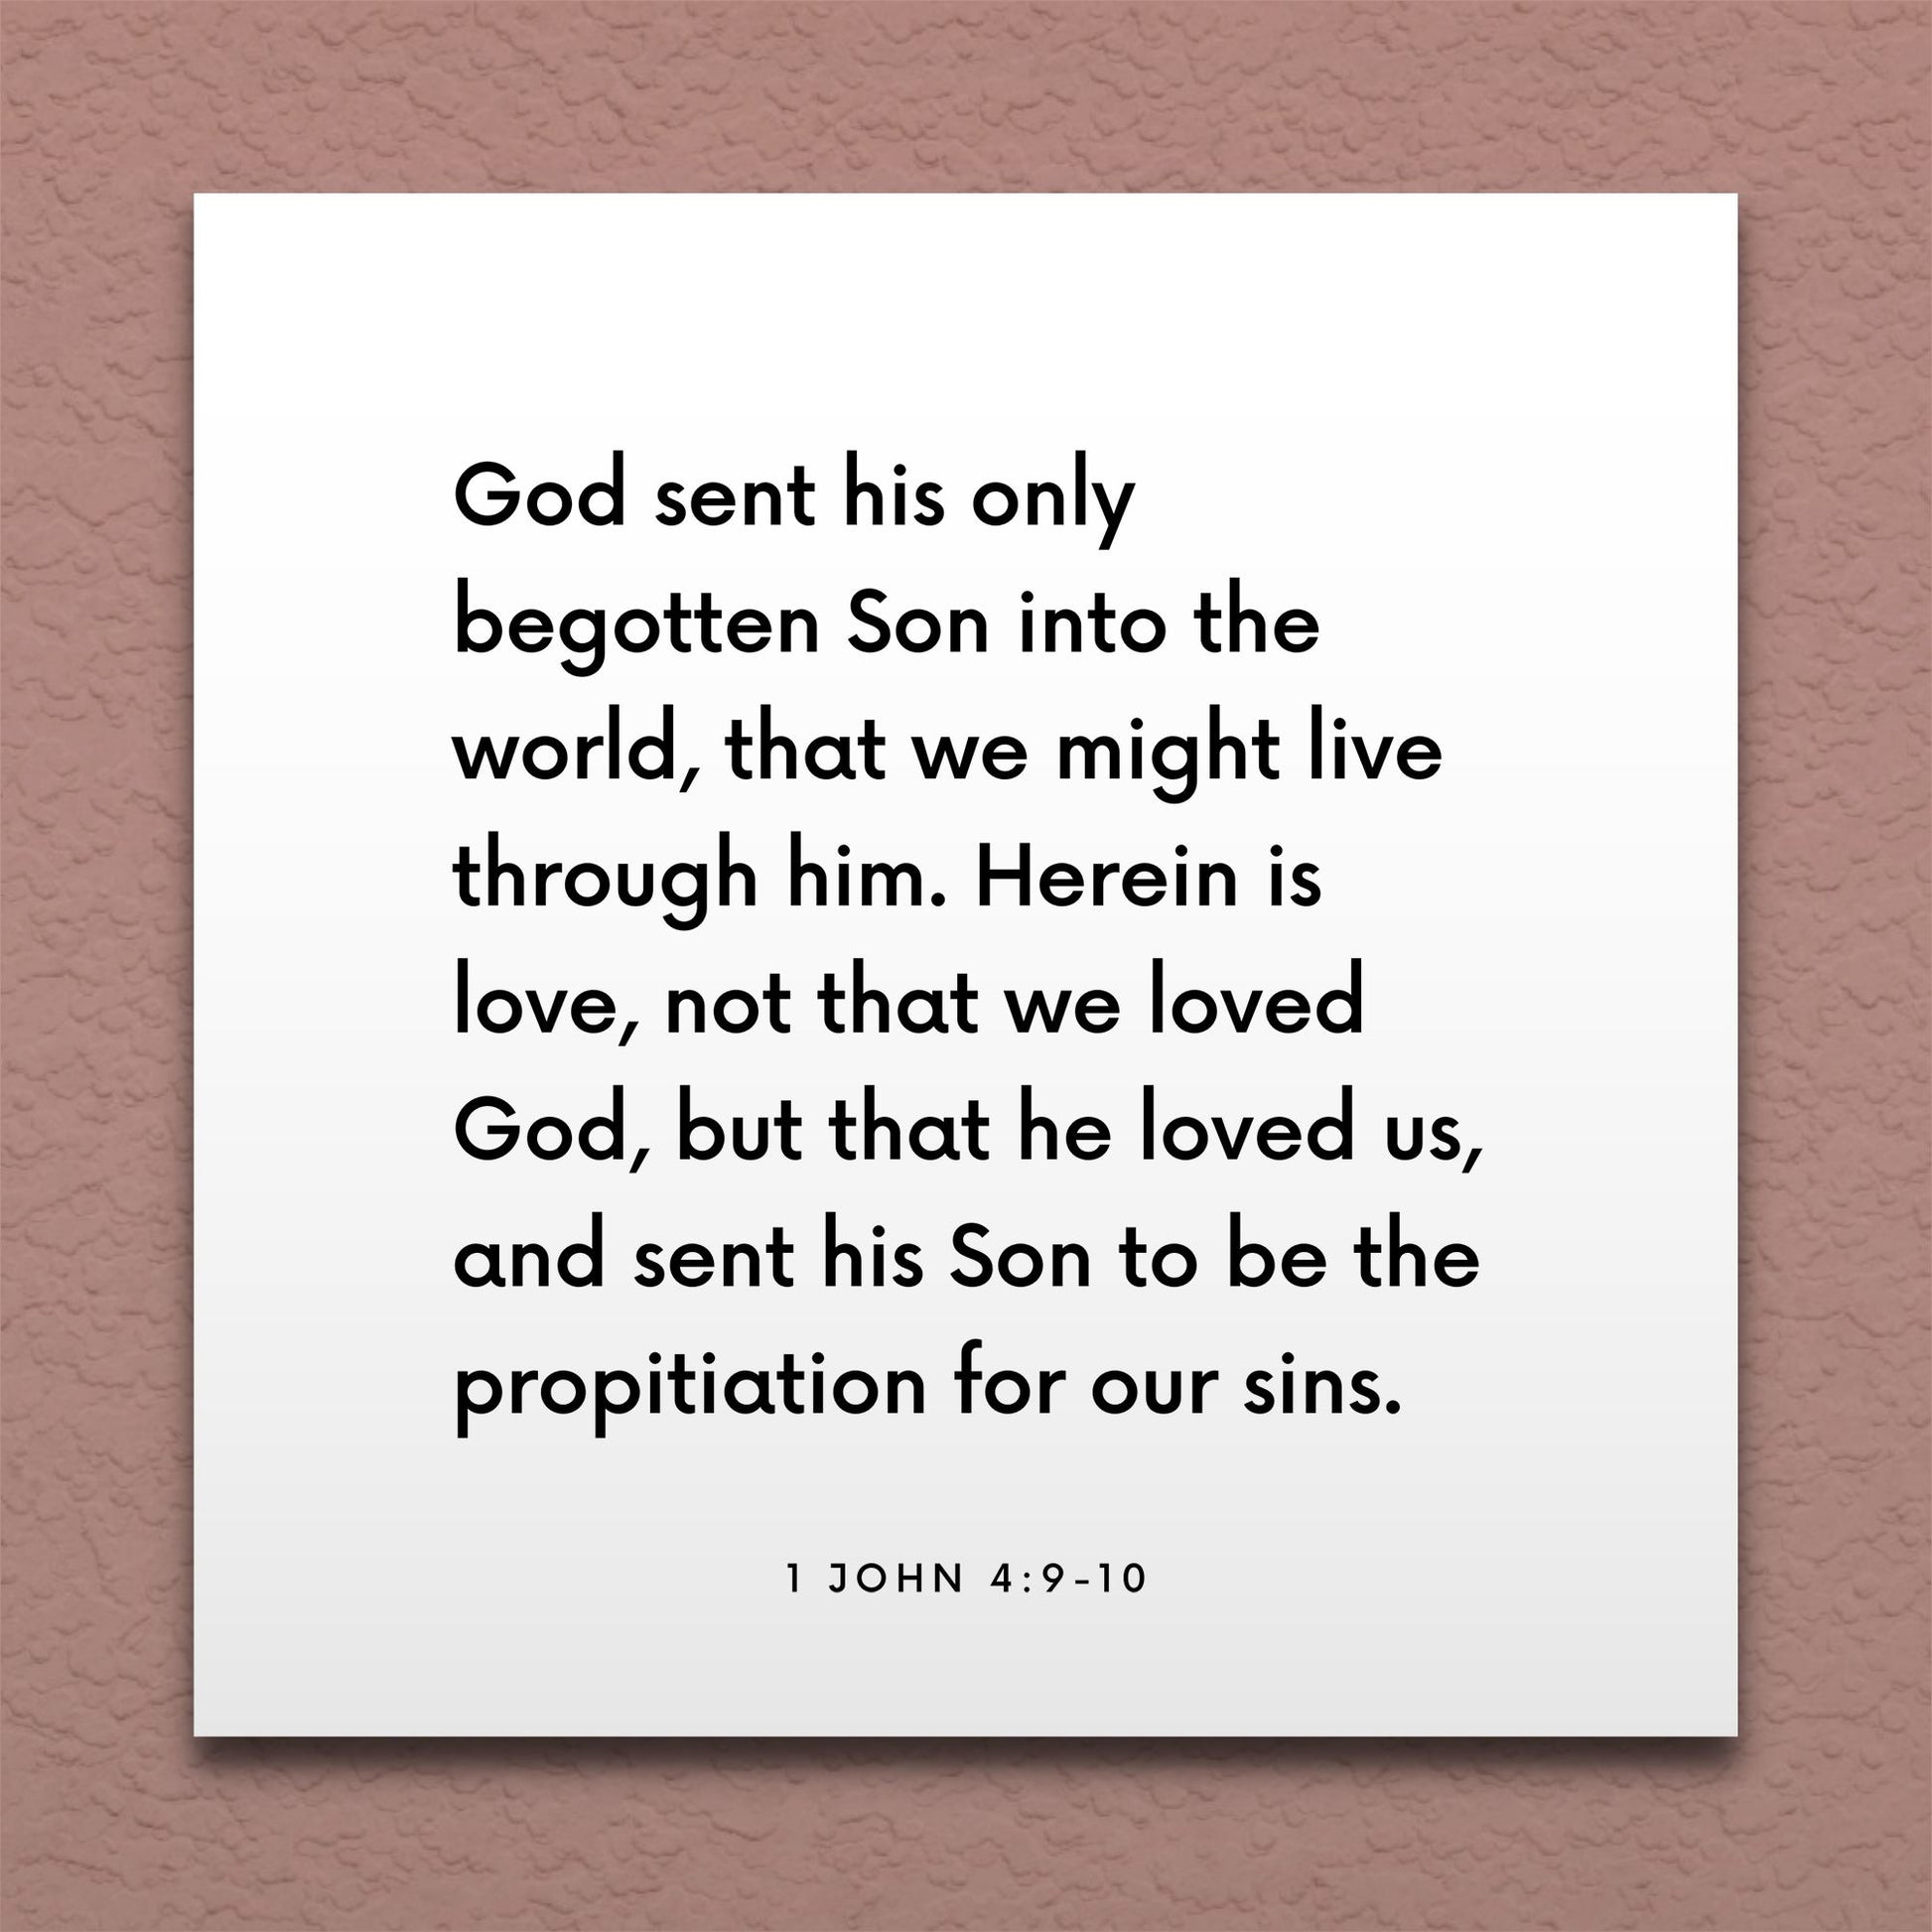 Wall-mounted scripture tile for 1 John 4:9-10 - "God sent his only begotten Son"